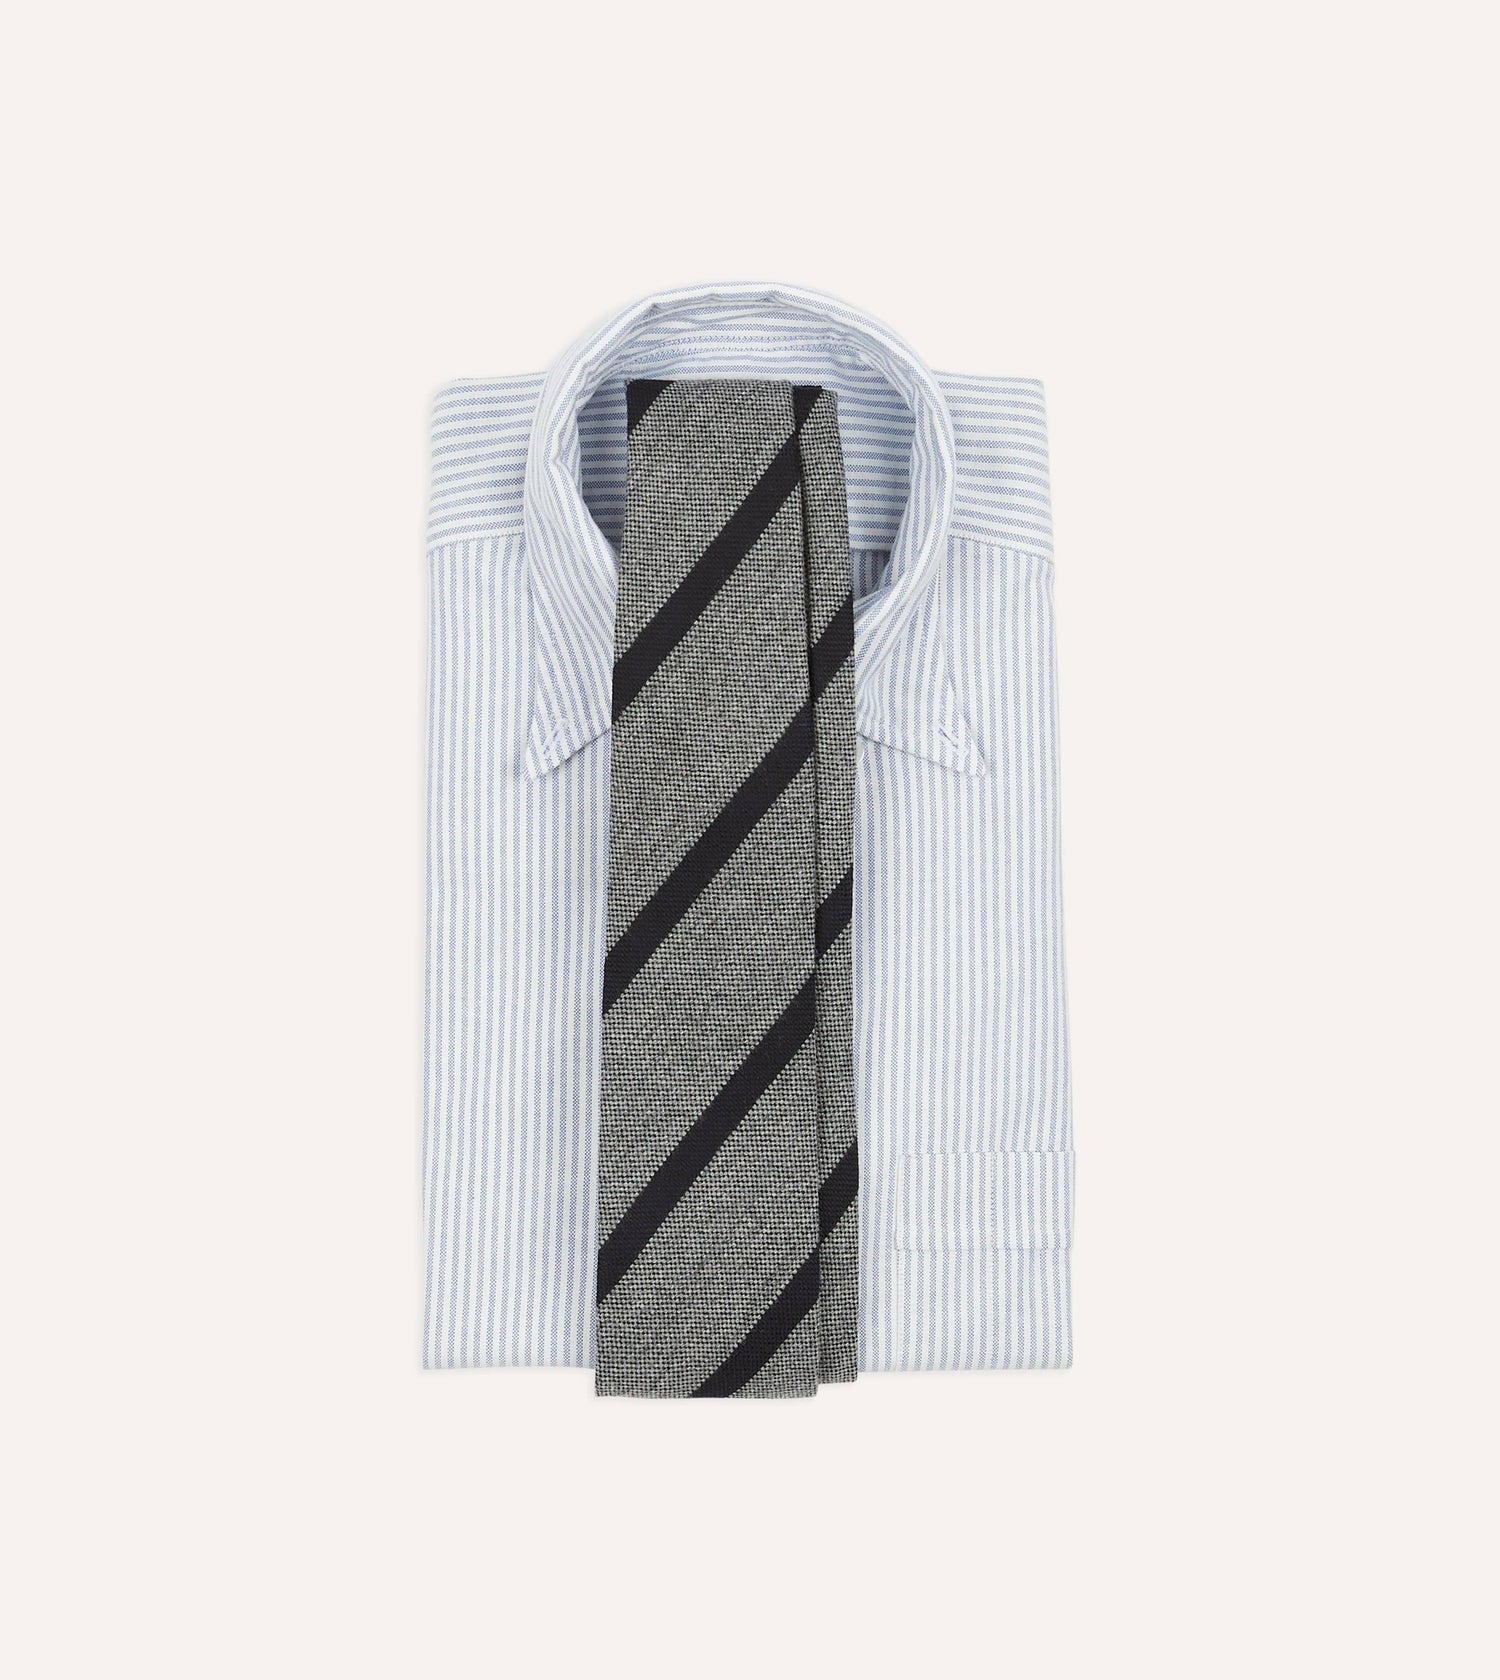 Grey and Black Double Stripe Hand Rolled Wool Tie